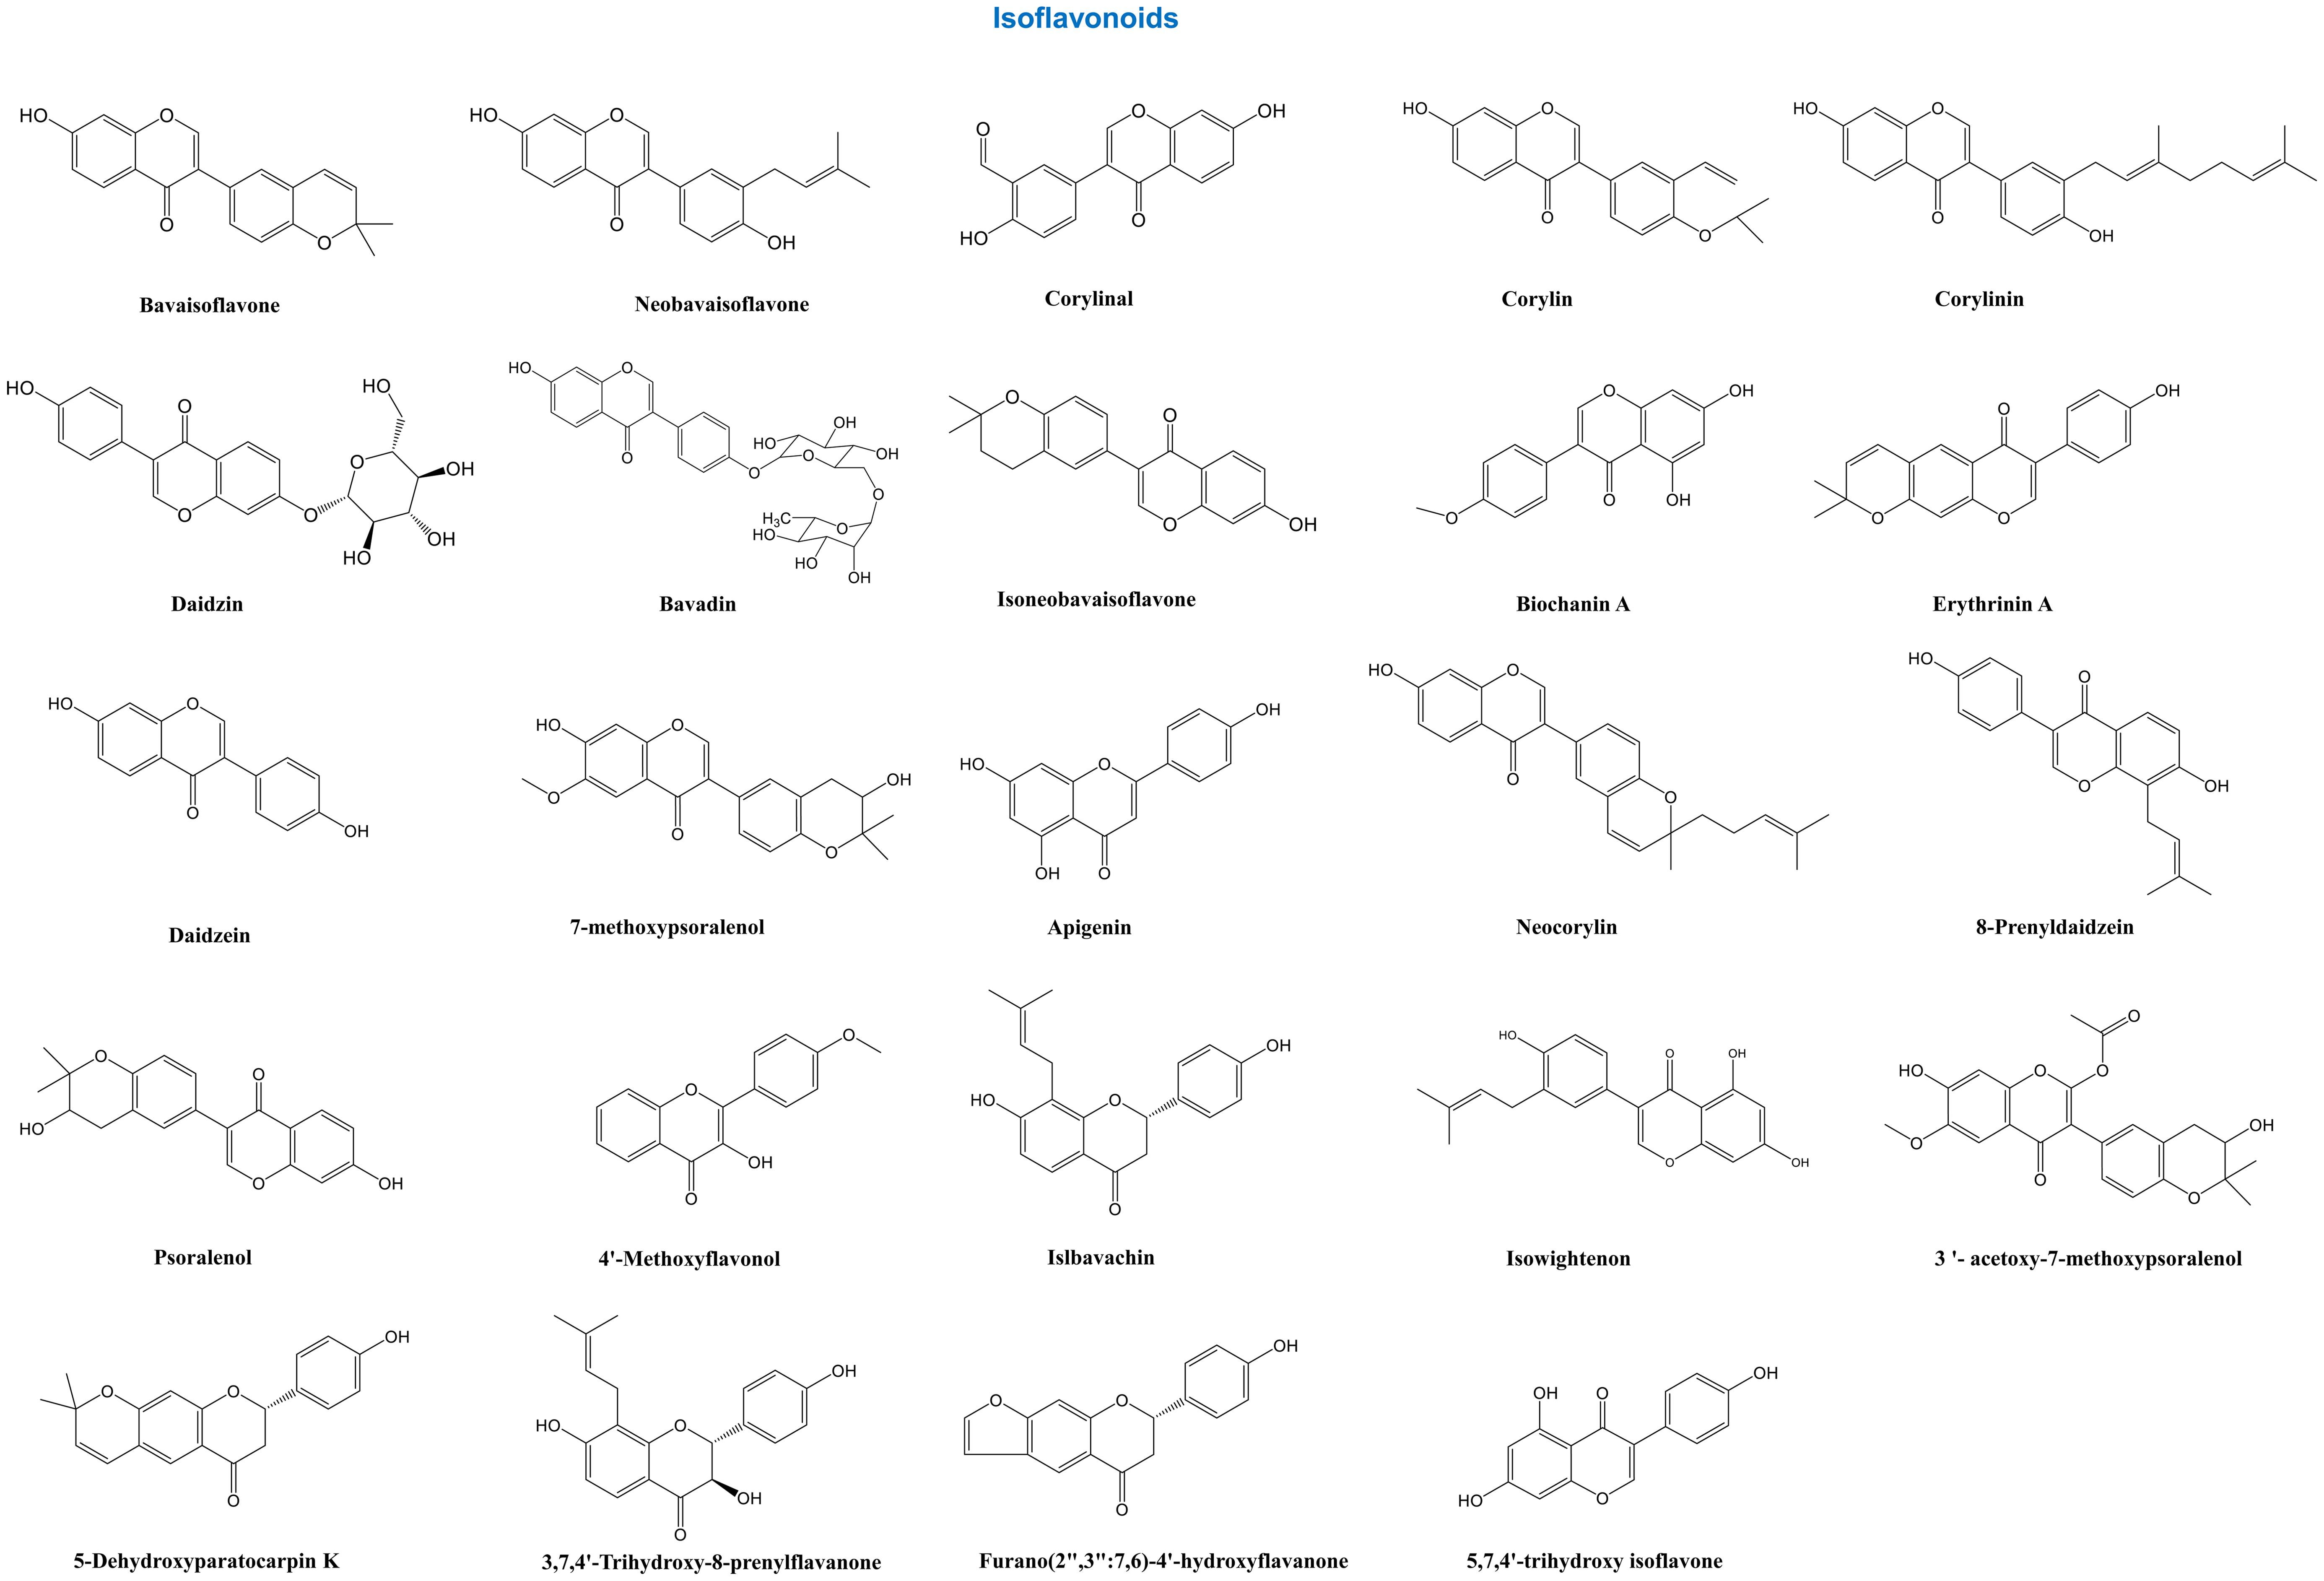 Chemical structures of isoflavonoids isolated from <italic>Psoralea corylifolia</italic> L.